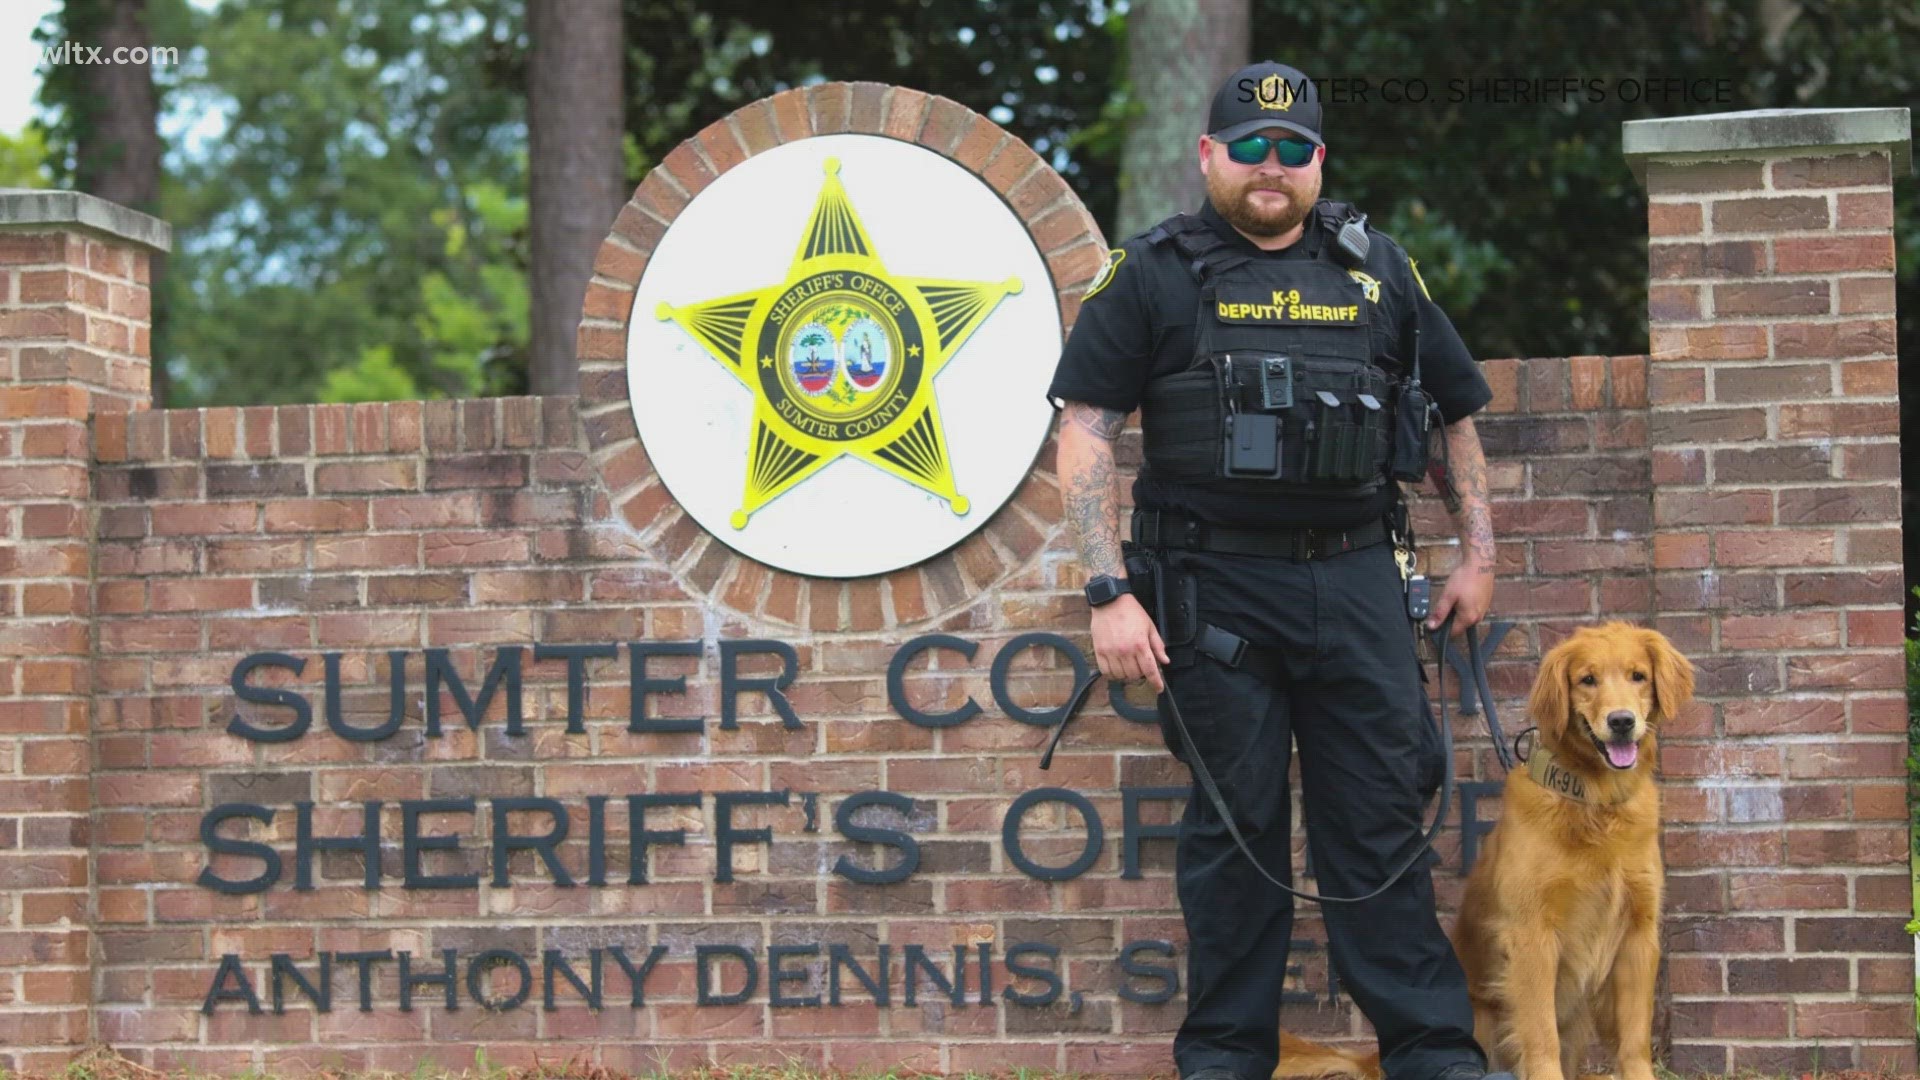 Sr. Deputy William Mosier had joined the sheriff's department on May 30, 2023